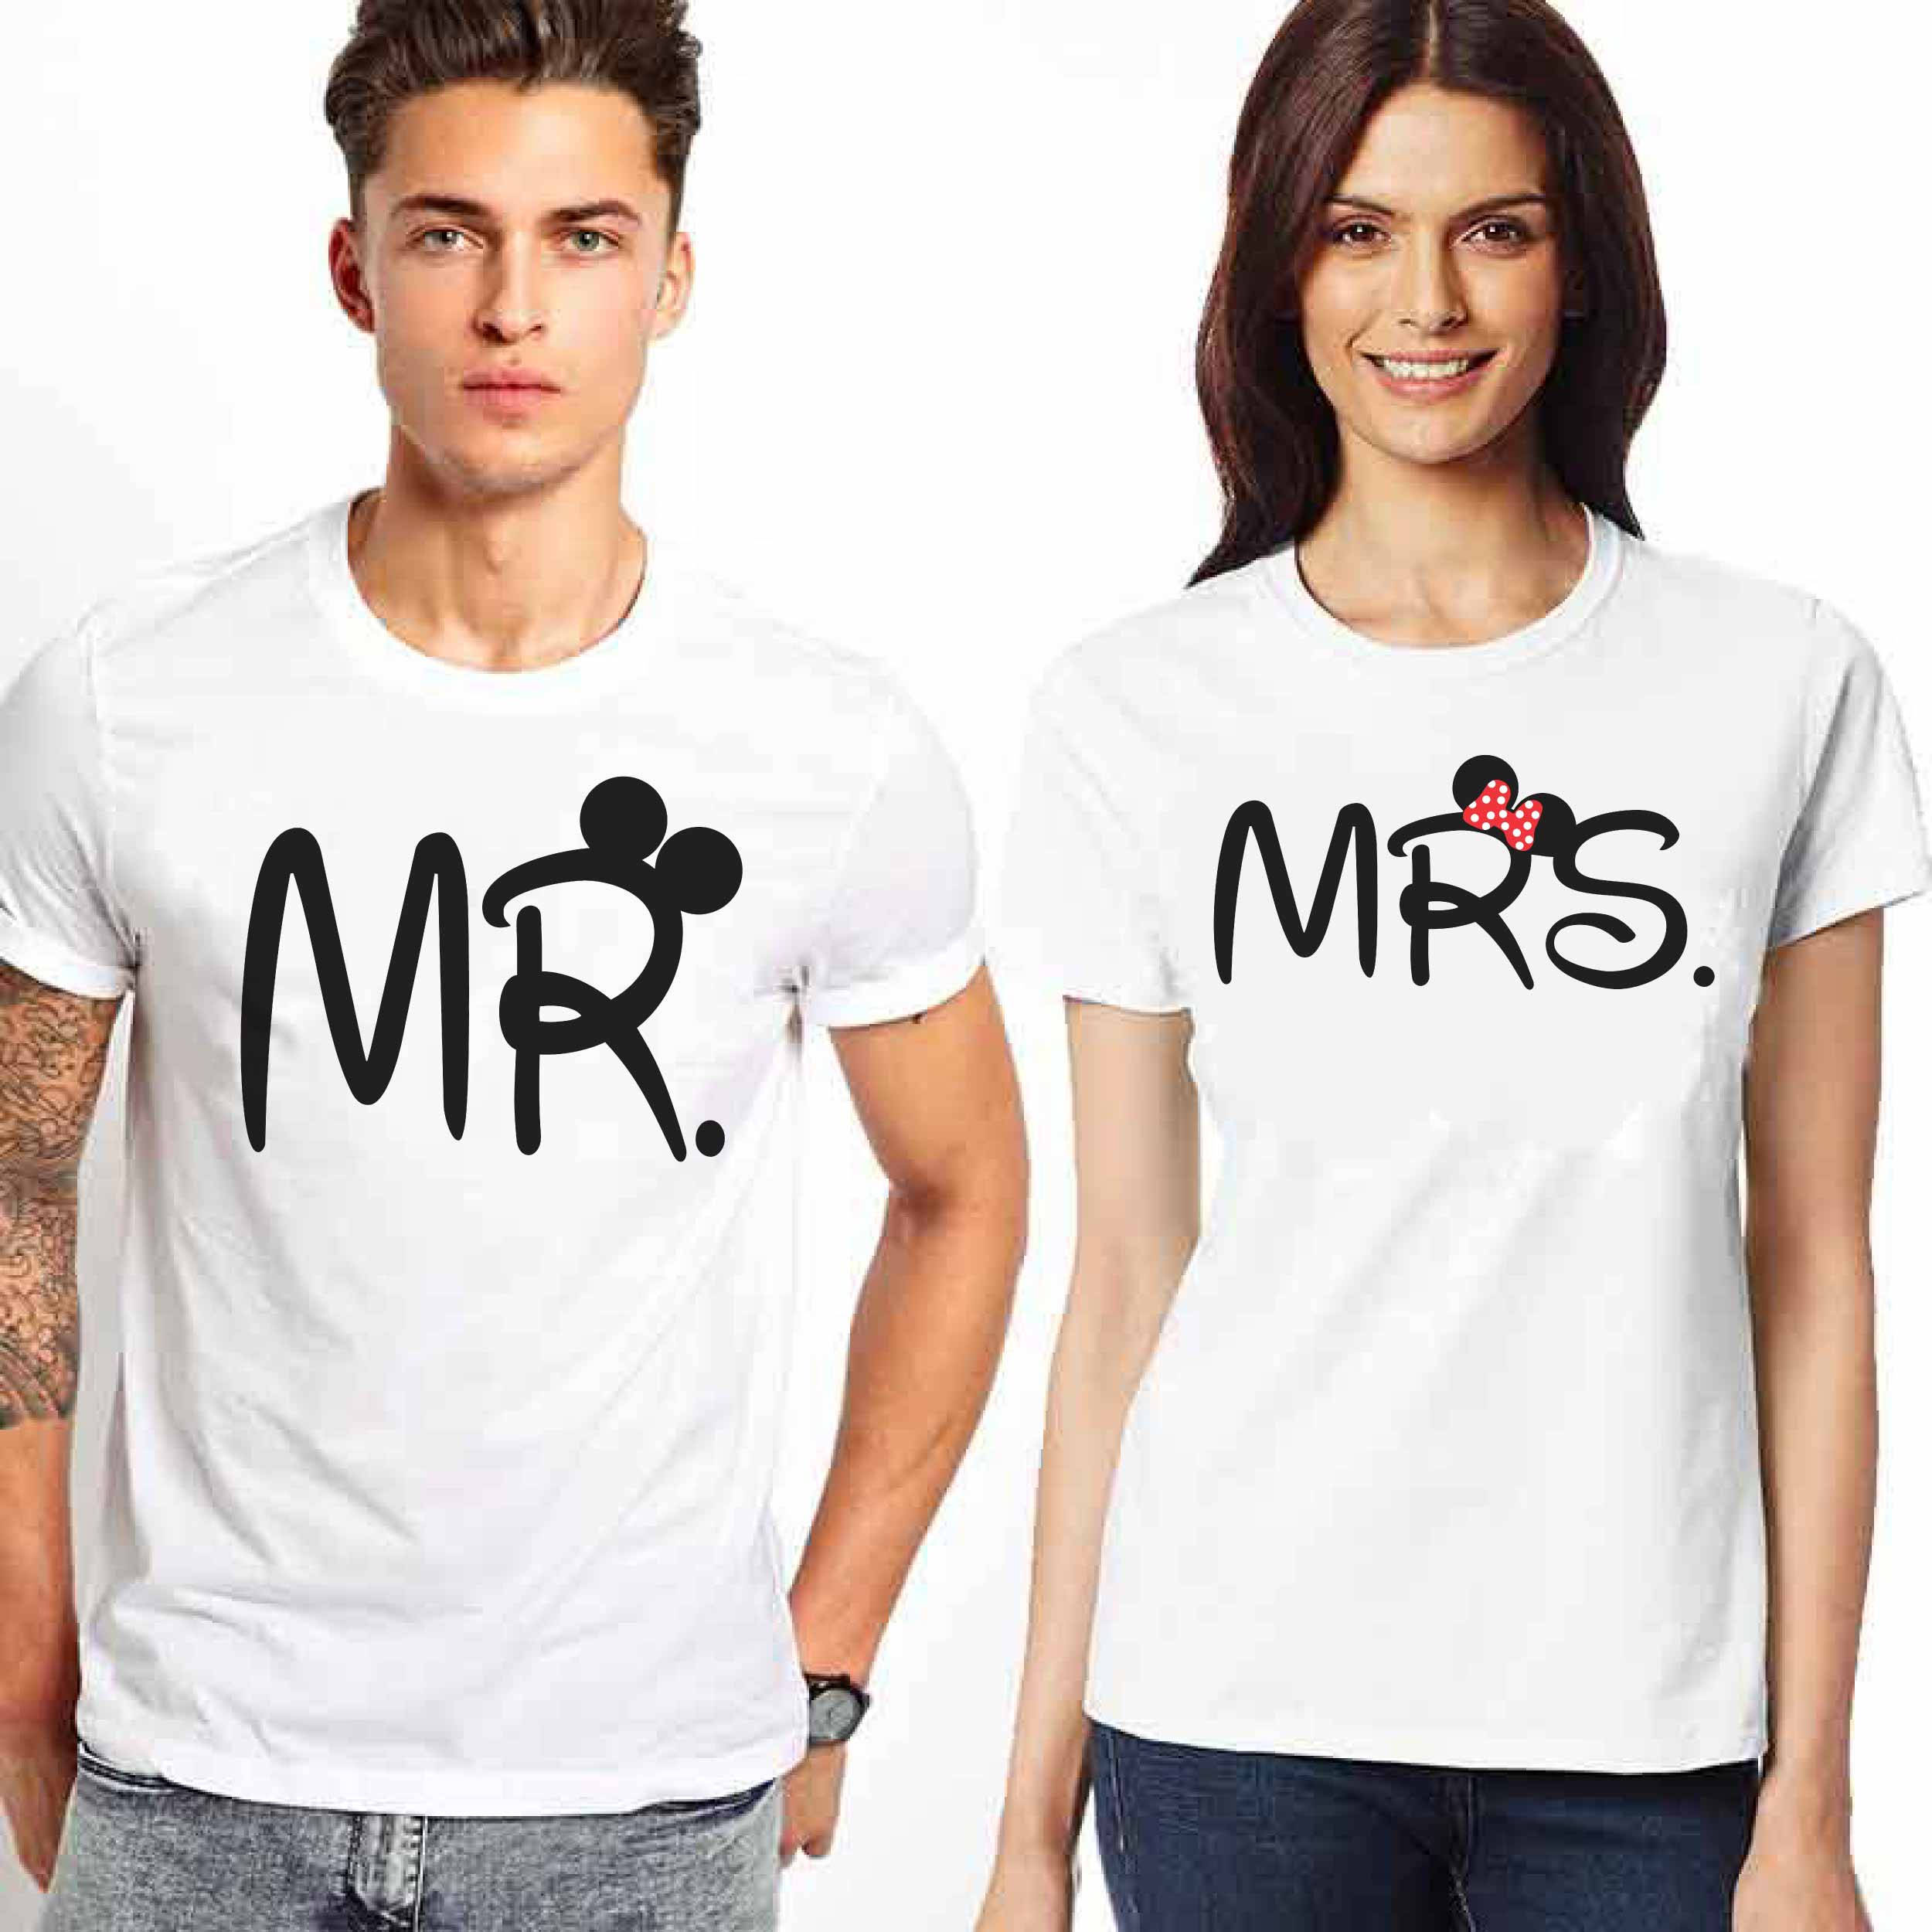 Disney Matching shirts for couples Mr and Mrs Disney t shirts | Etsy